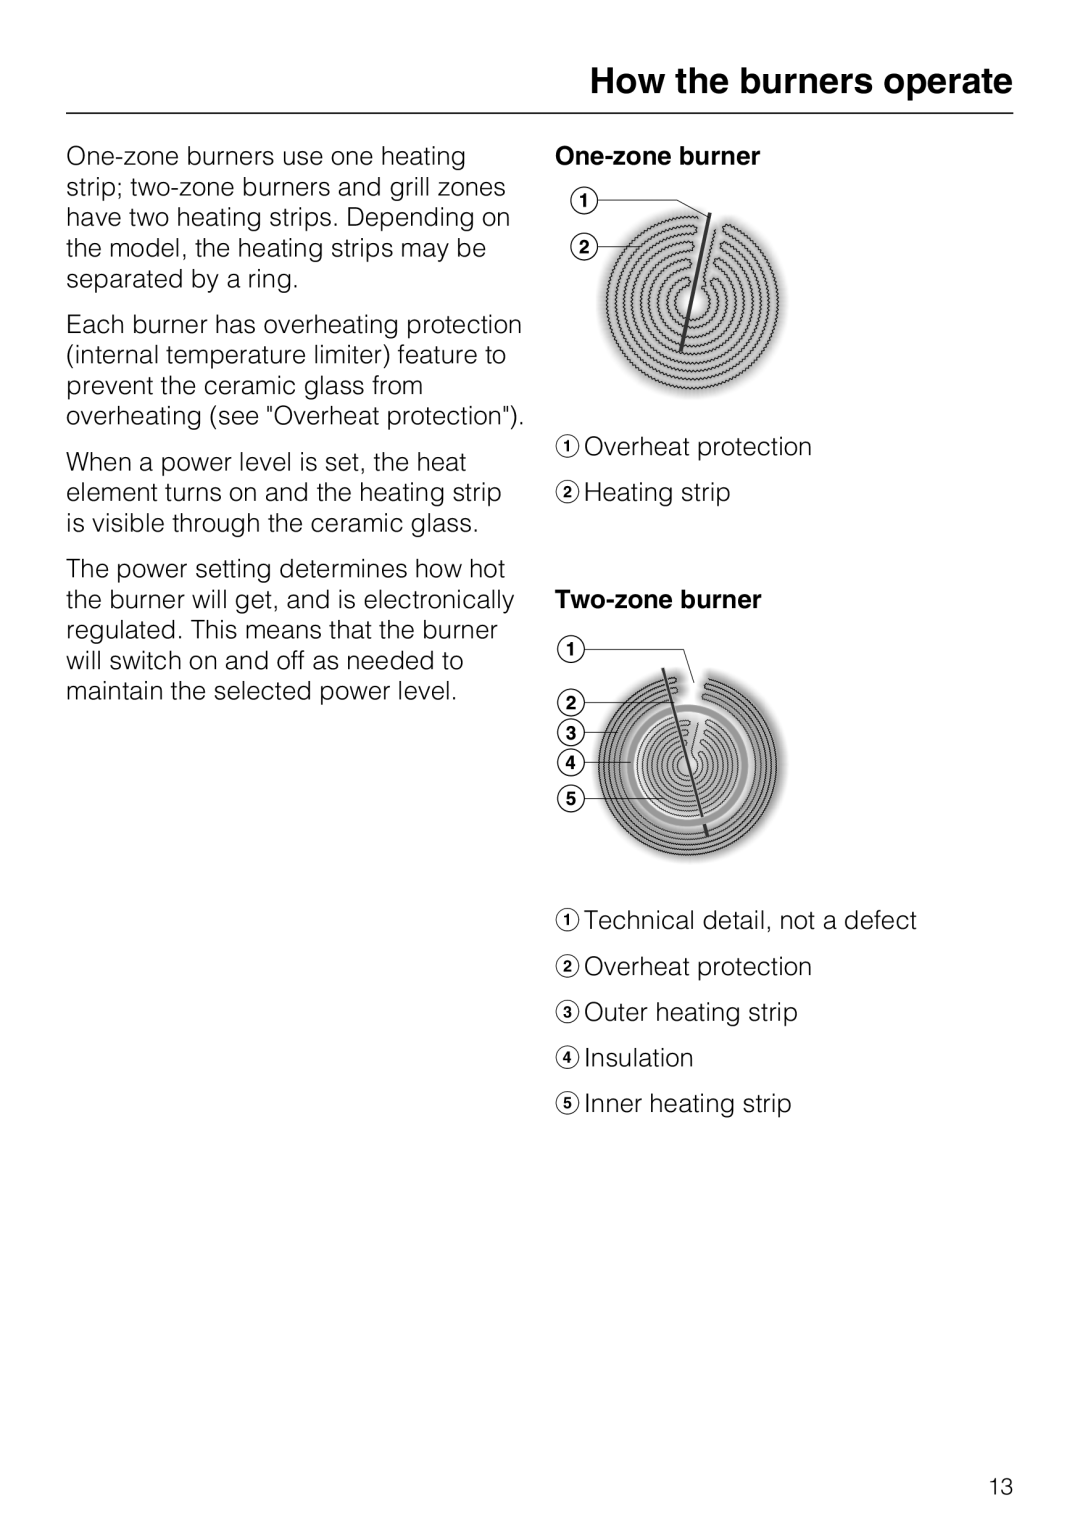 Miele KM 5820 installation instructions How the burners operate, One-zoneburner, Two-zoneburner 